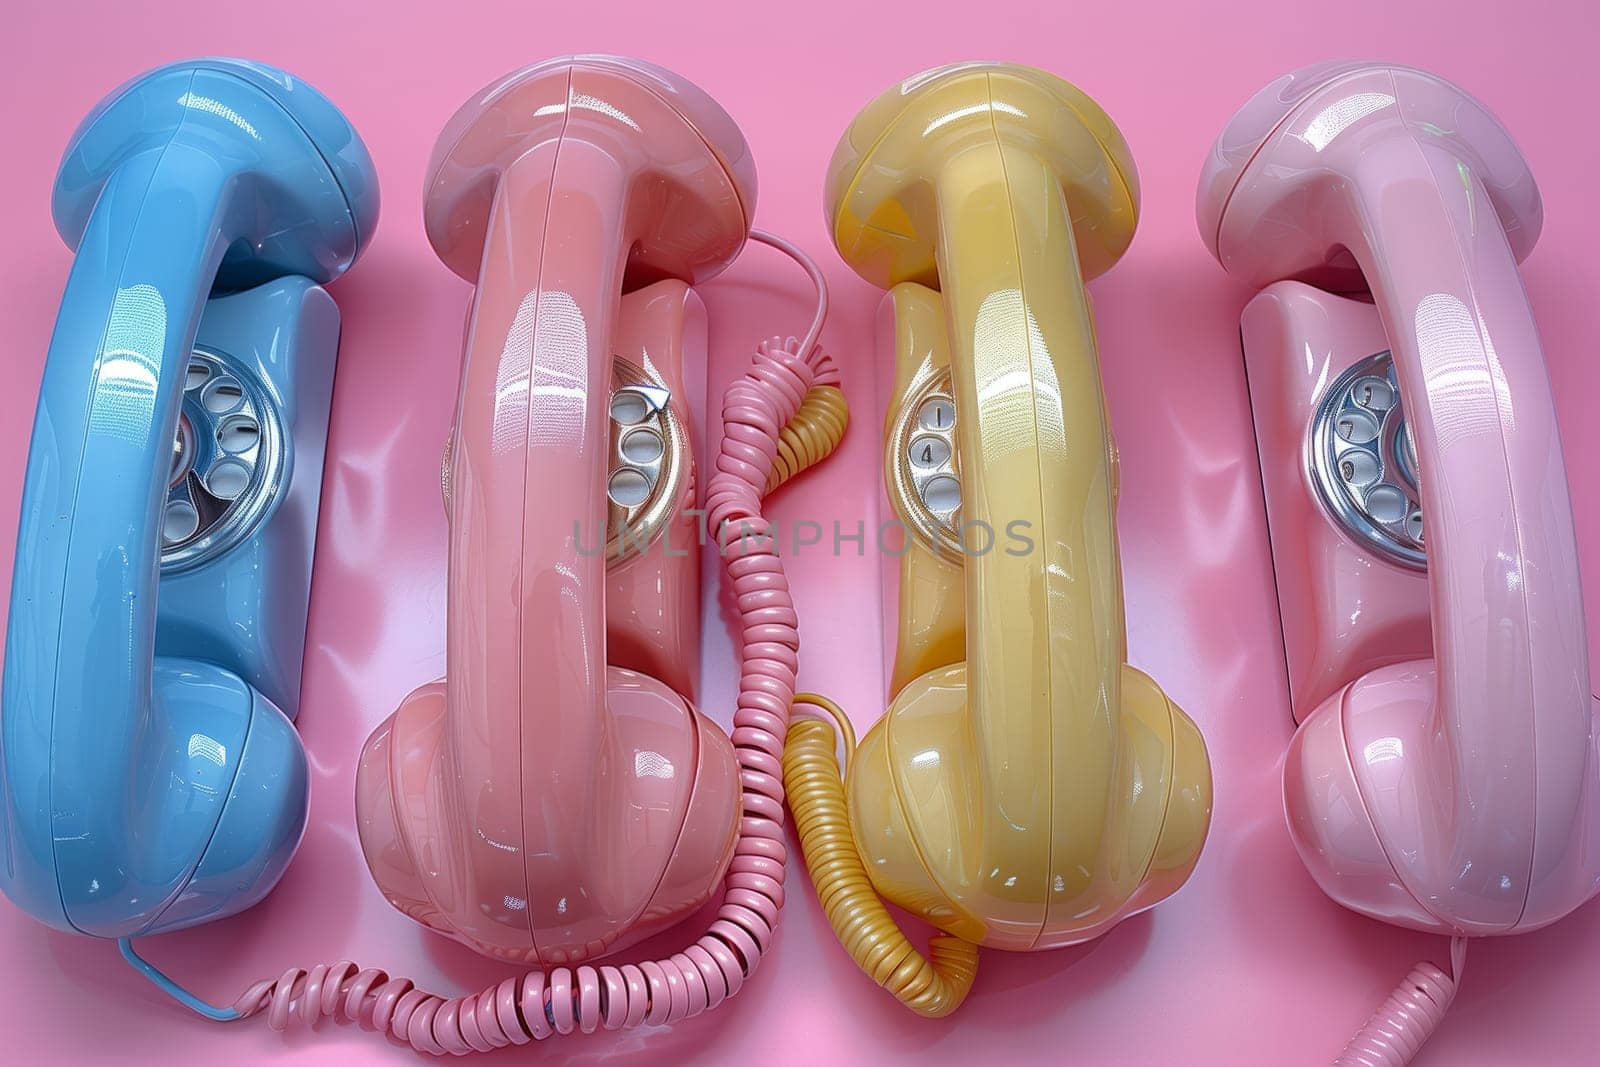 Row of pink and yellow telephones on pink background by richwolf